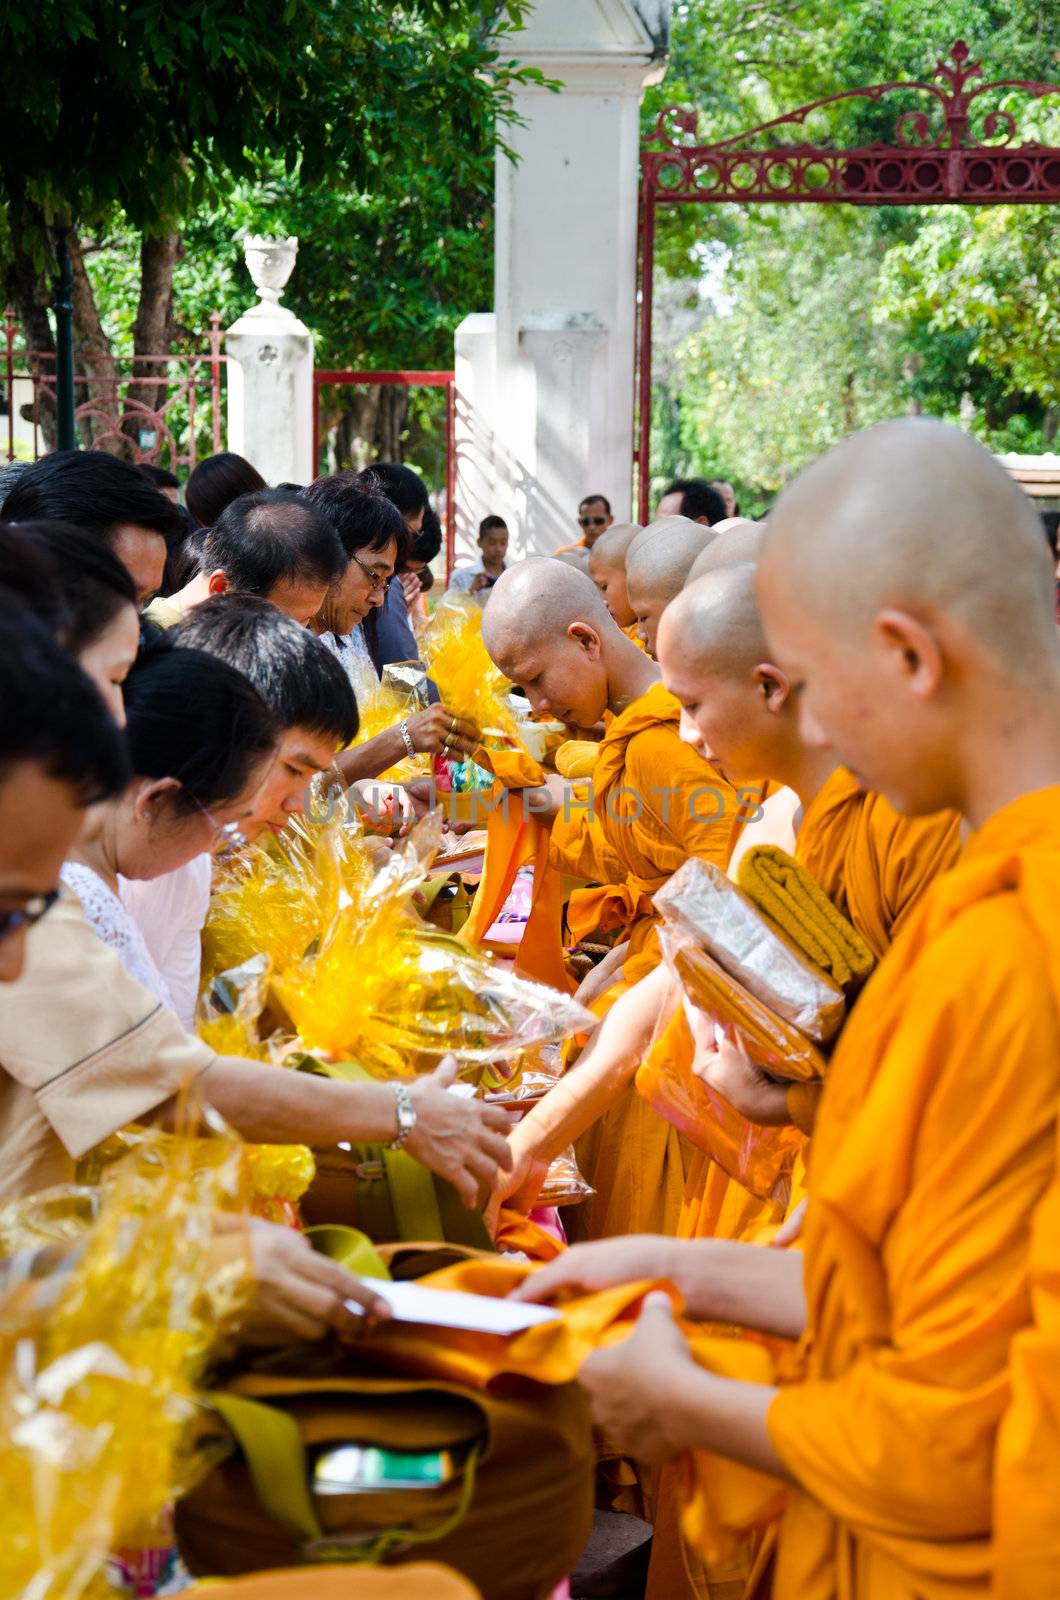 AYUTTHAYA, THAILAND - JUNE 4: Unidentified priests in Matriculation Ceremony of Buddhist monk on June 4, 2012 in Ayutthaya.Traditionally, Thai men at the age of 20 years will become Buddhist monk.